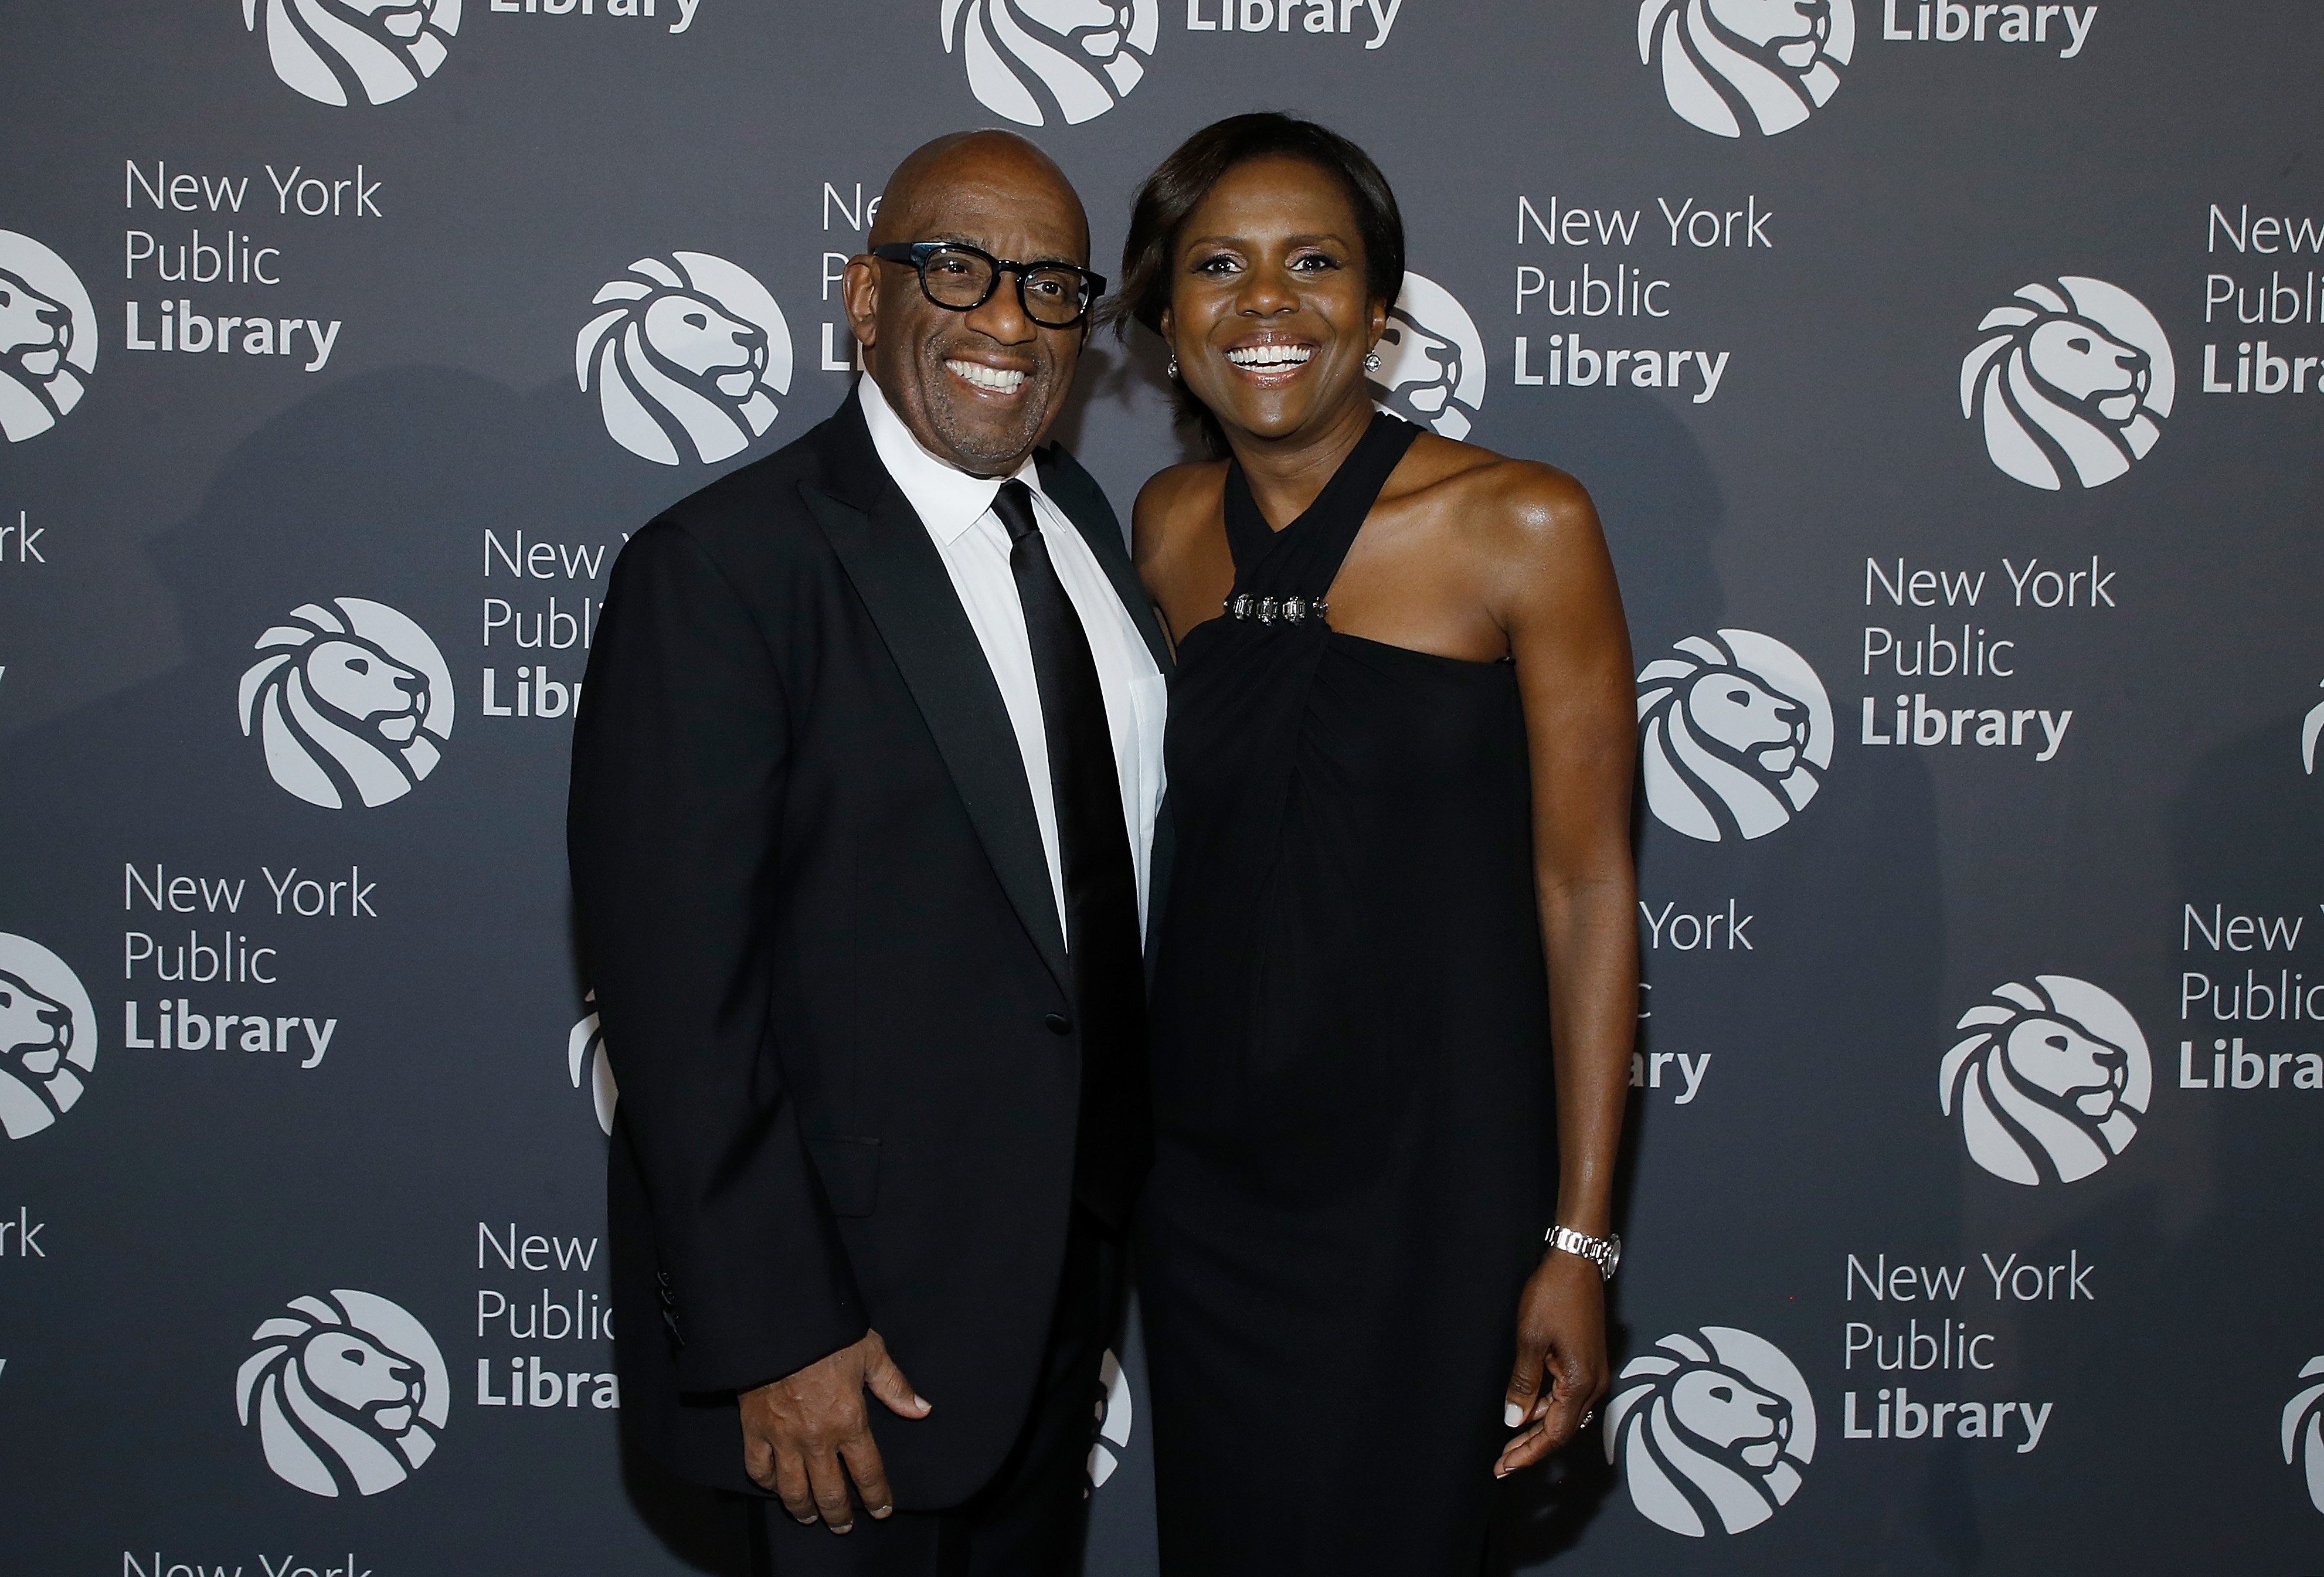 Al Roker and Deborah Roberts attends the New York Public Library 2017 Library Lions Gala at the New York Public Library at the Stephen A. Schwarzman Building on November 6, 2017 in New York City | Source: Getty Images